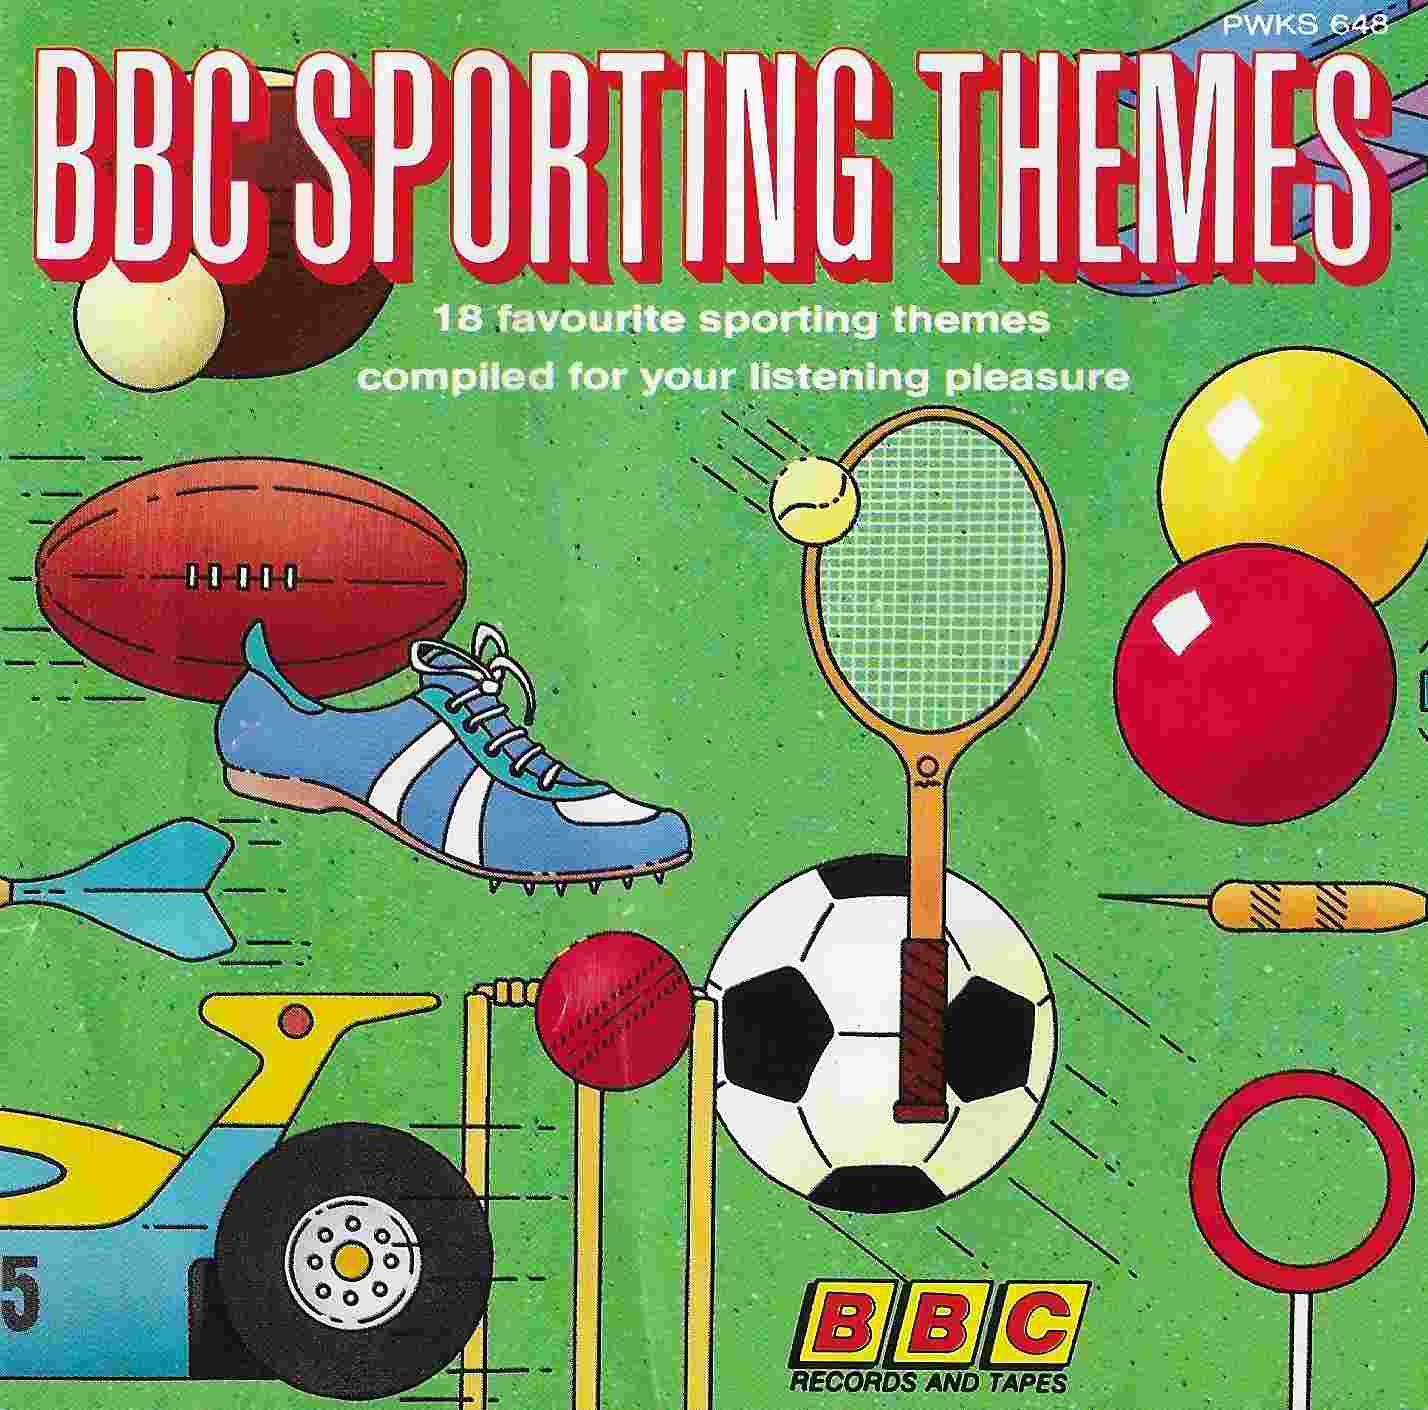 Picture of BBC sporting themes by artist Various from the BBC cds - Records and Tapes library